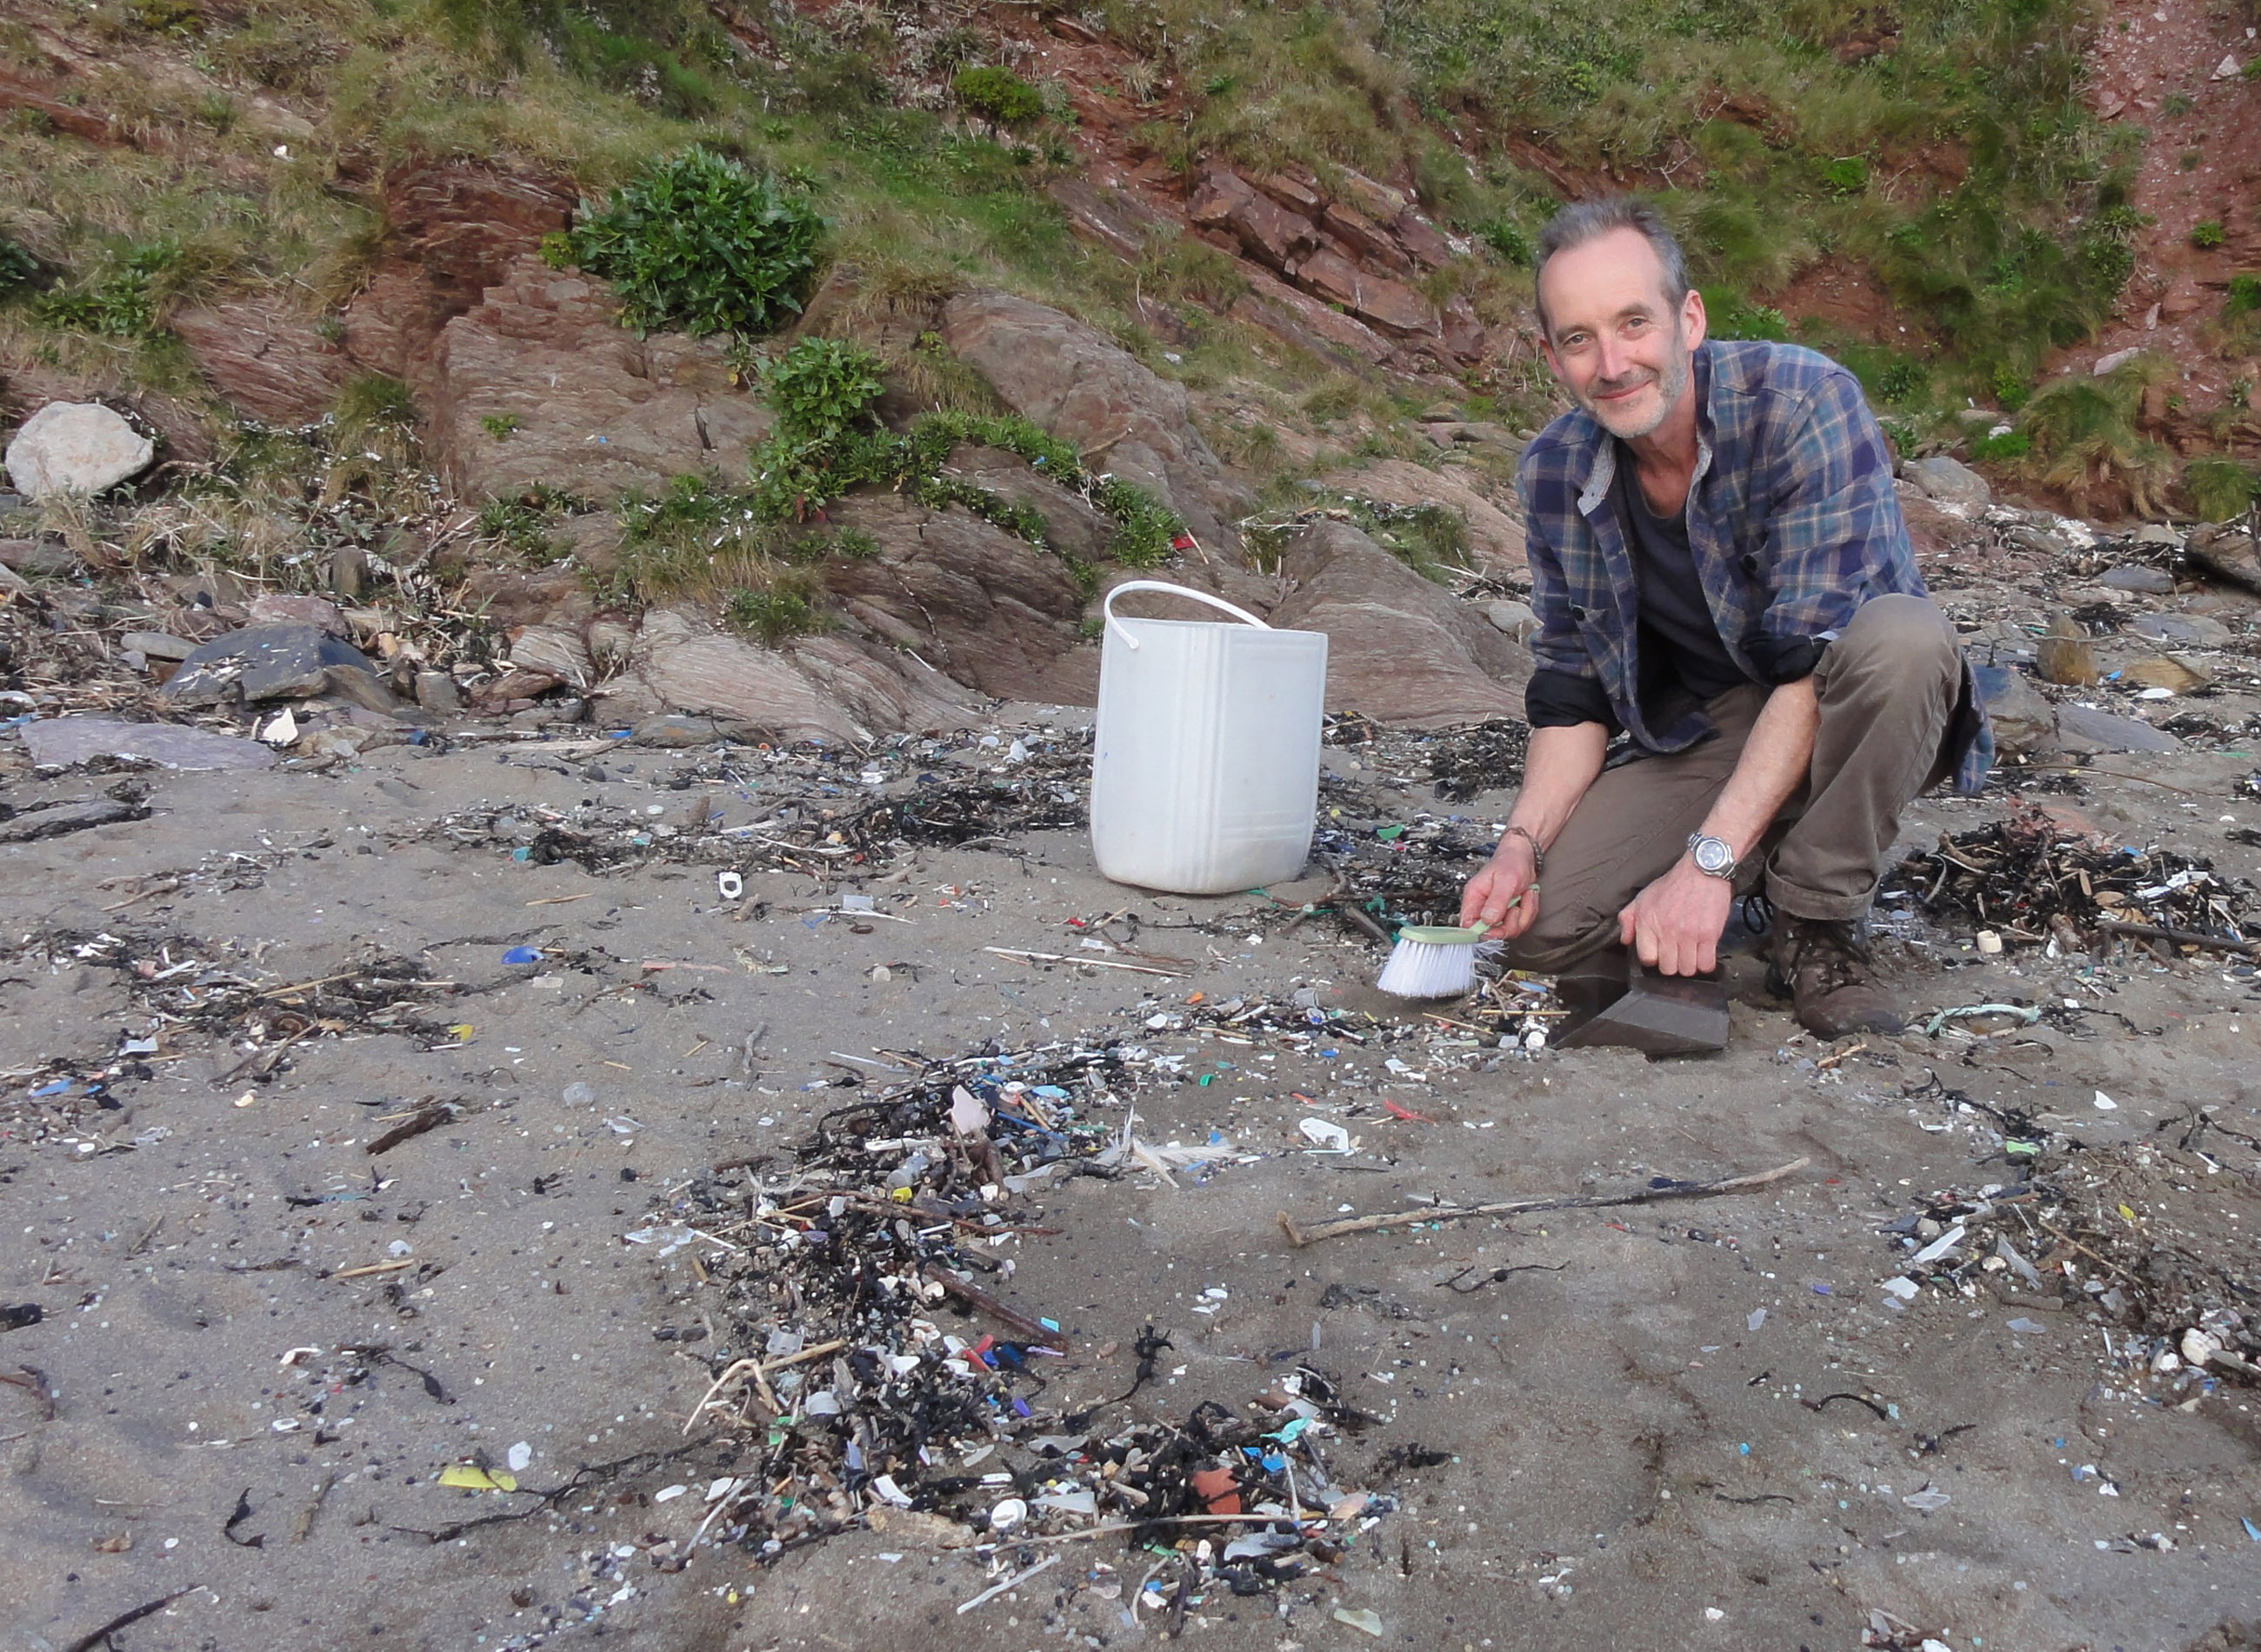 Brushing up microplastics from the beach